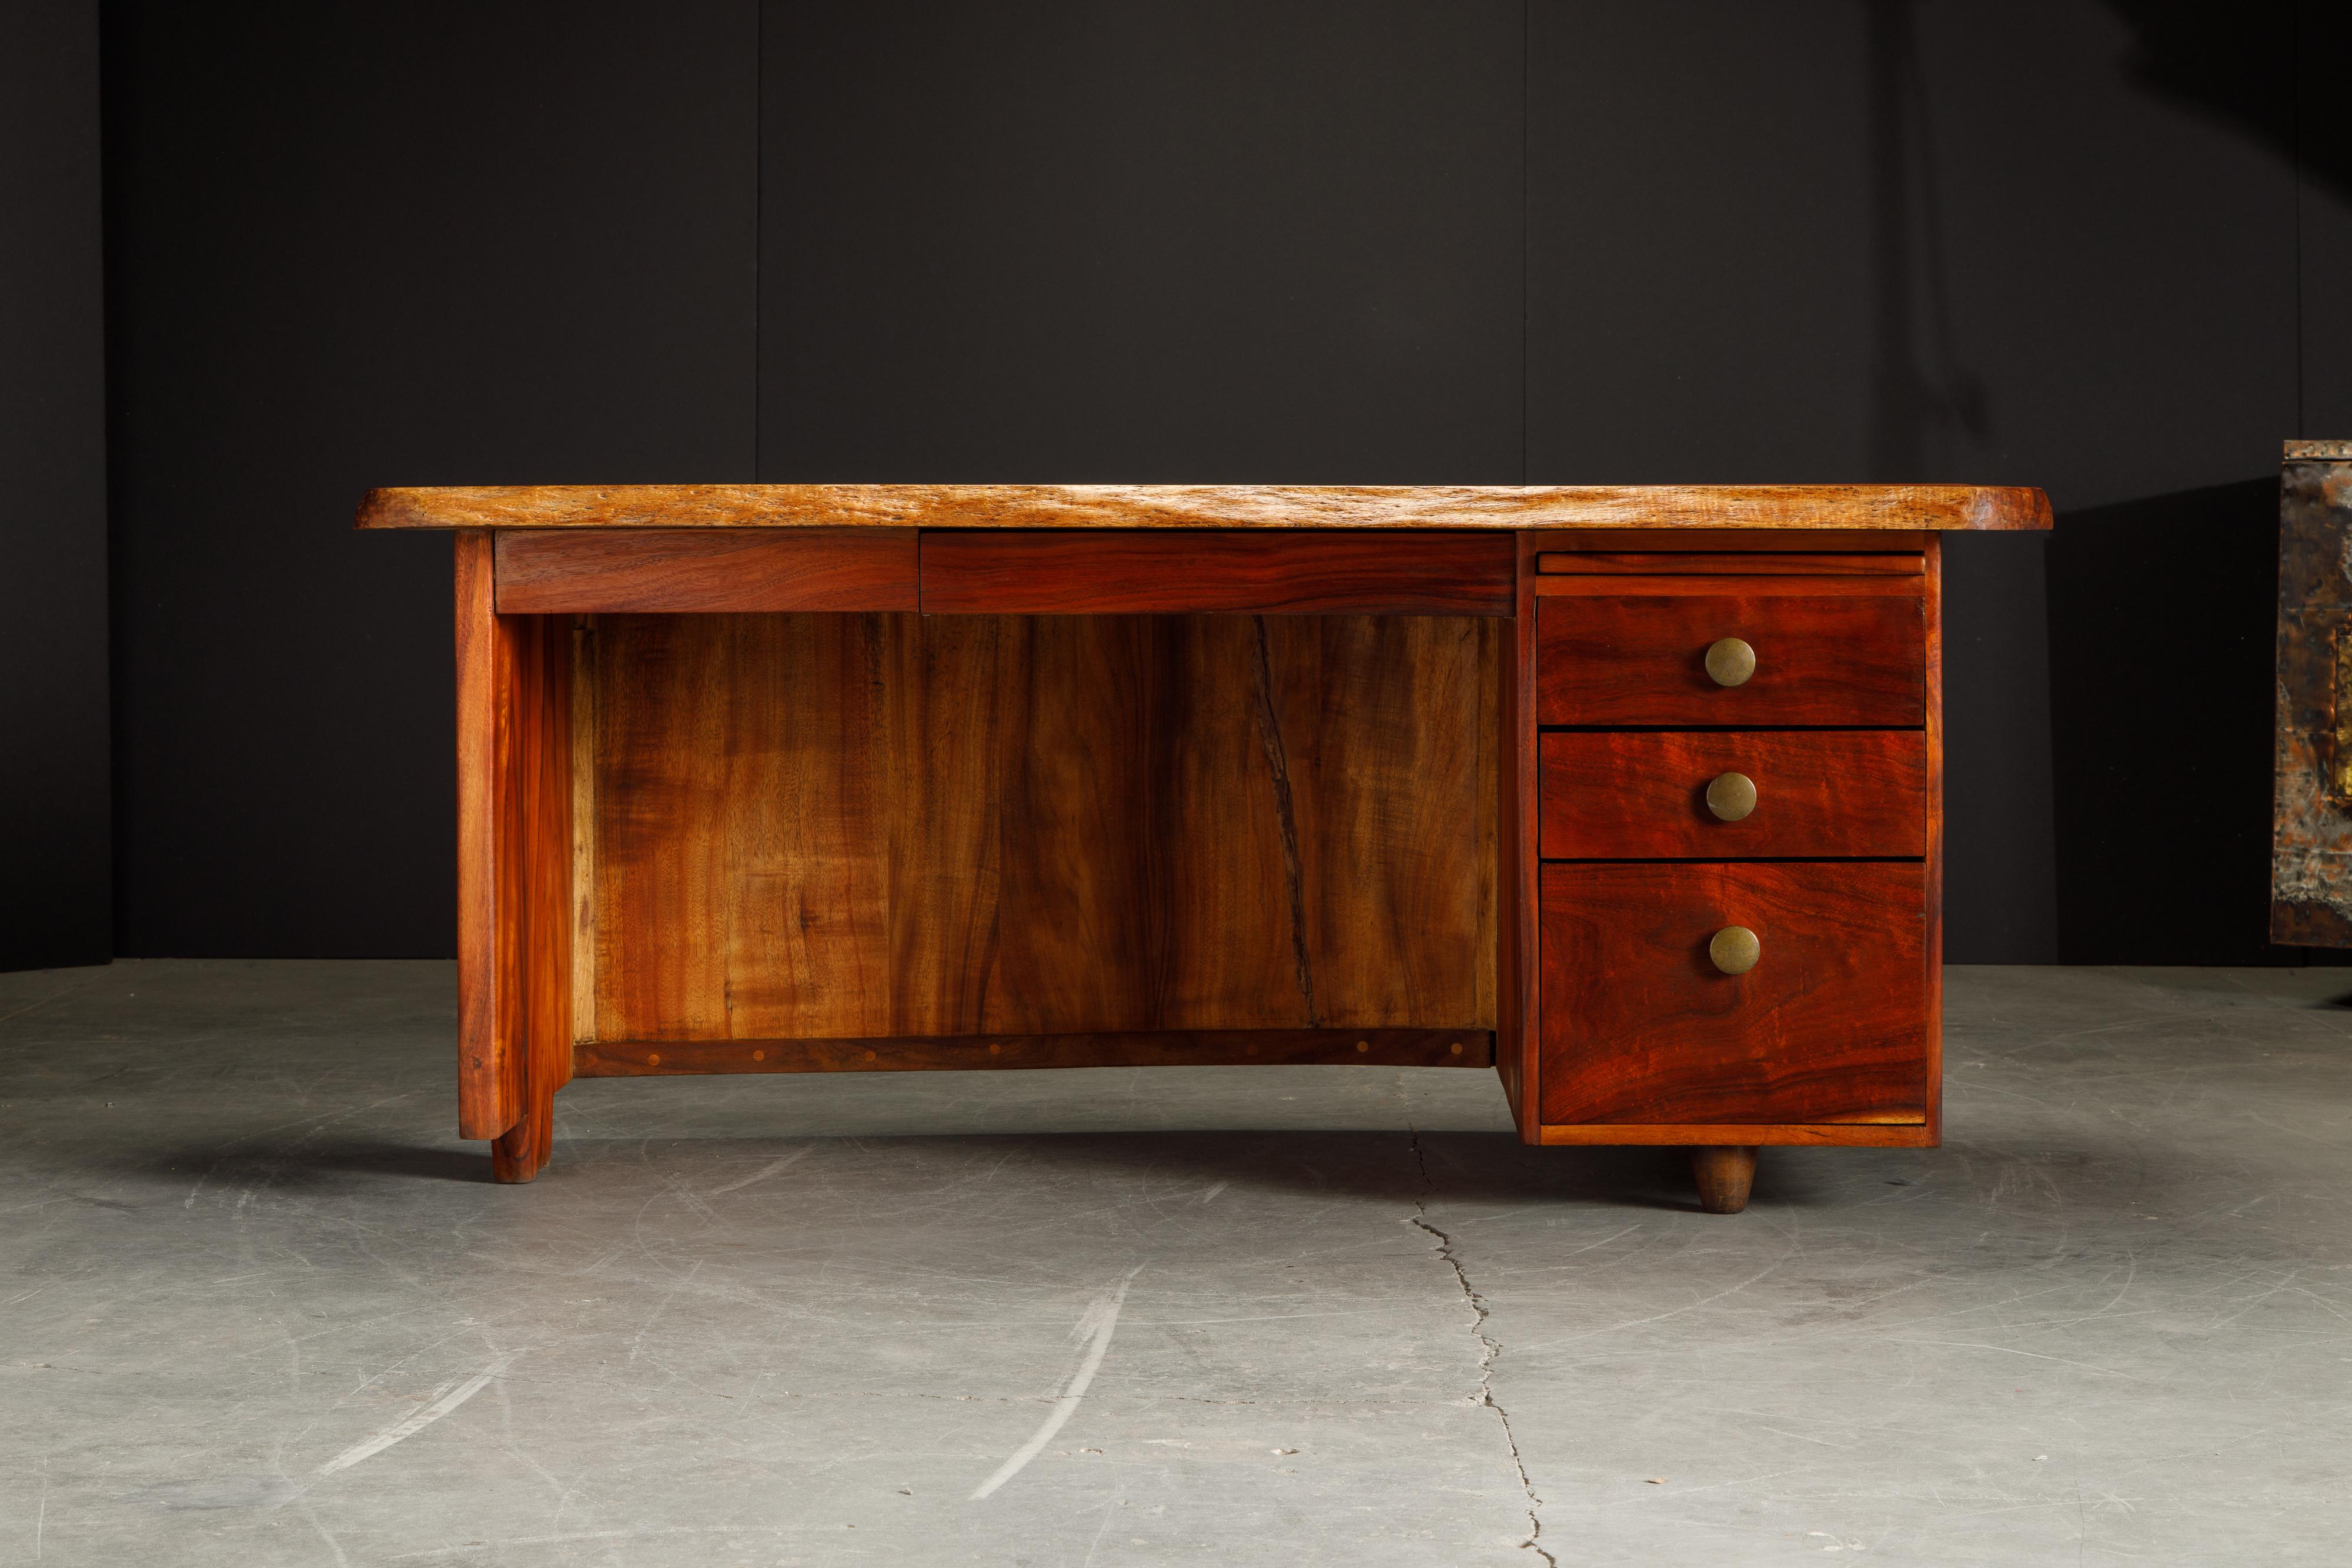 This beautiful 1970s Craftsman desk features a floating double live-edge top, three drawers on the right pedestal along with a center pencil drawer and a pull out writing surface. The wood appears to be an exotic wood, we believe it to be Koa wood.